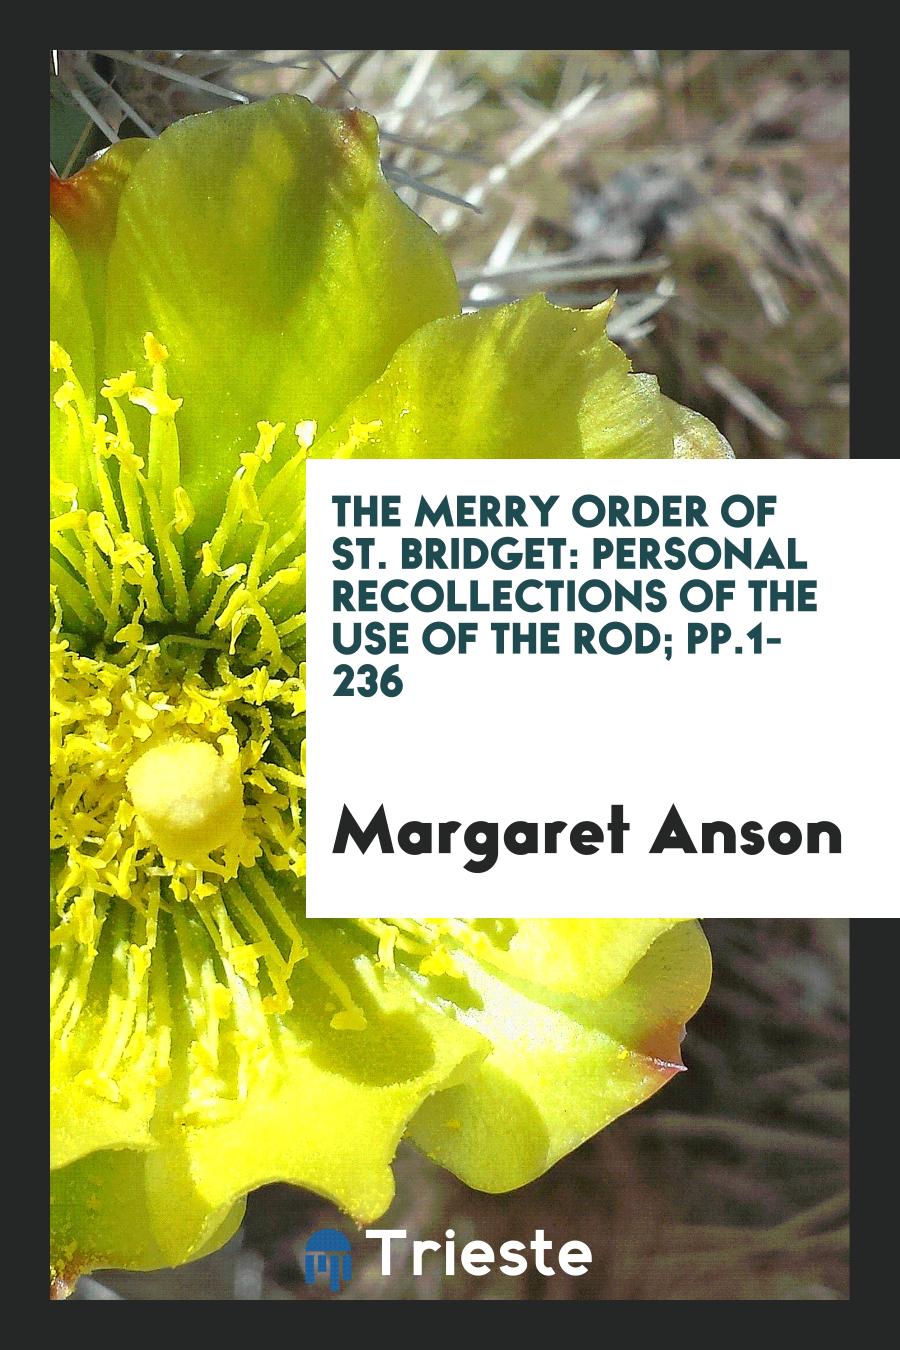 The Merry Order of St. Bridget: Personal Recollections of the Use of the Rod; pp.1-236